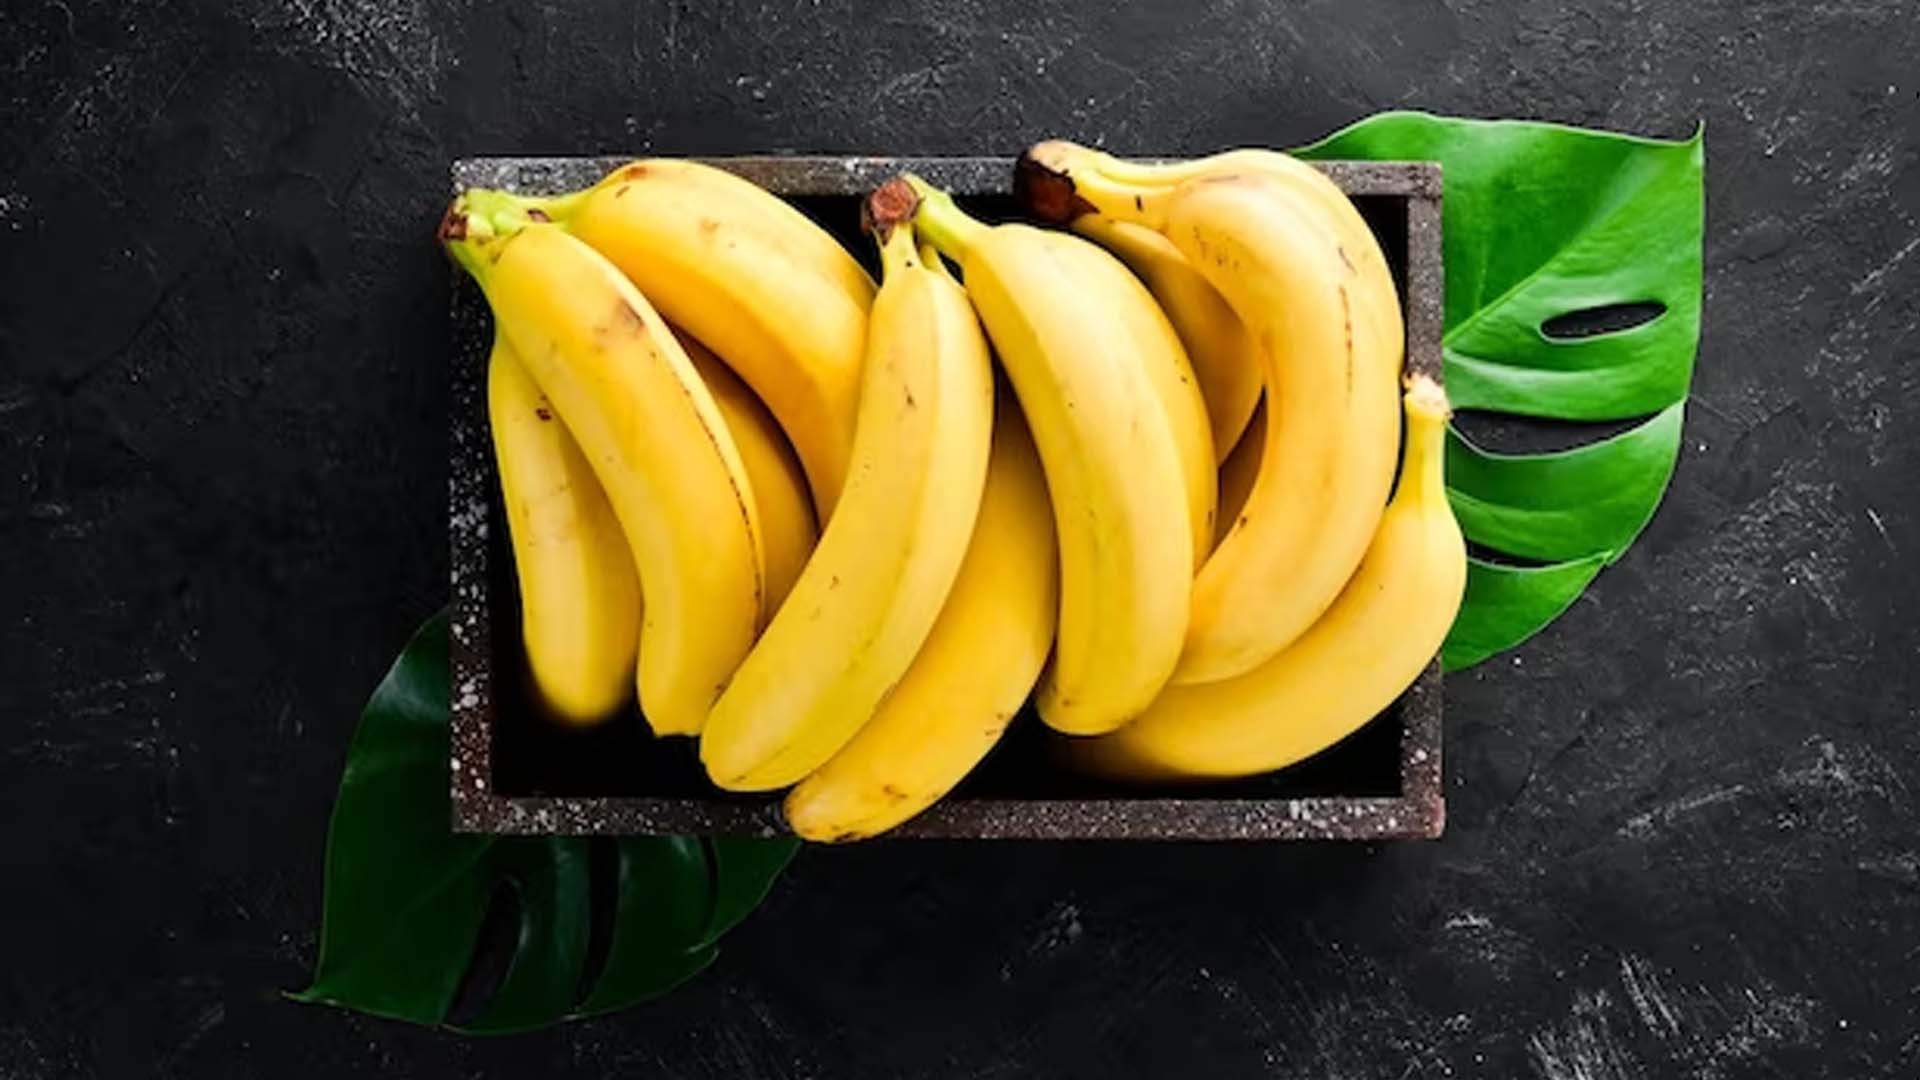 Does Banana Cause Cough?